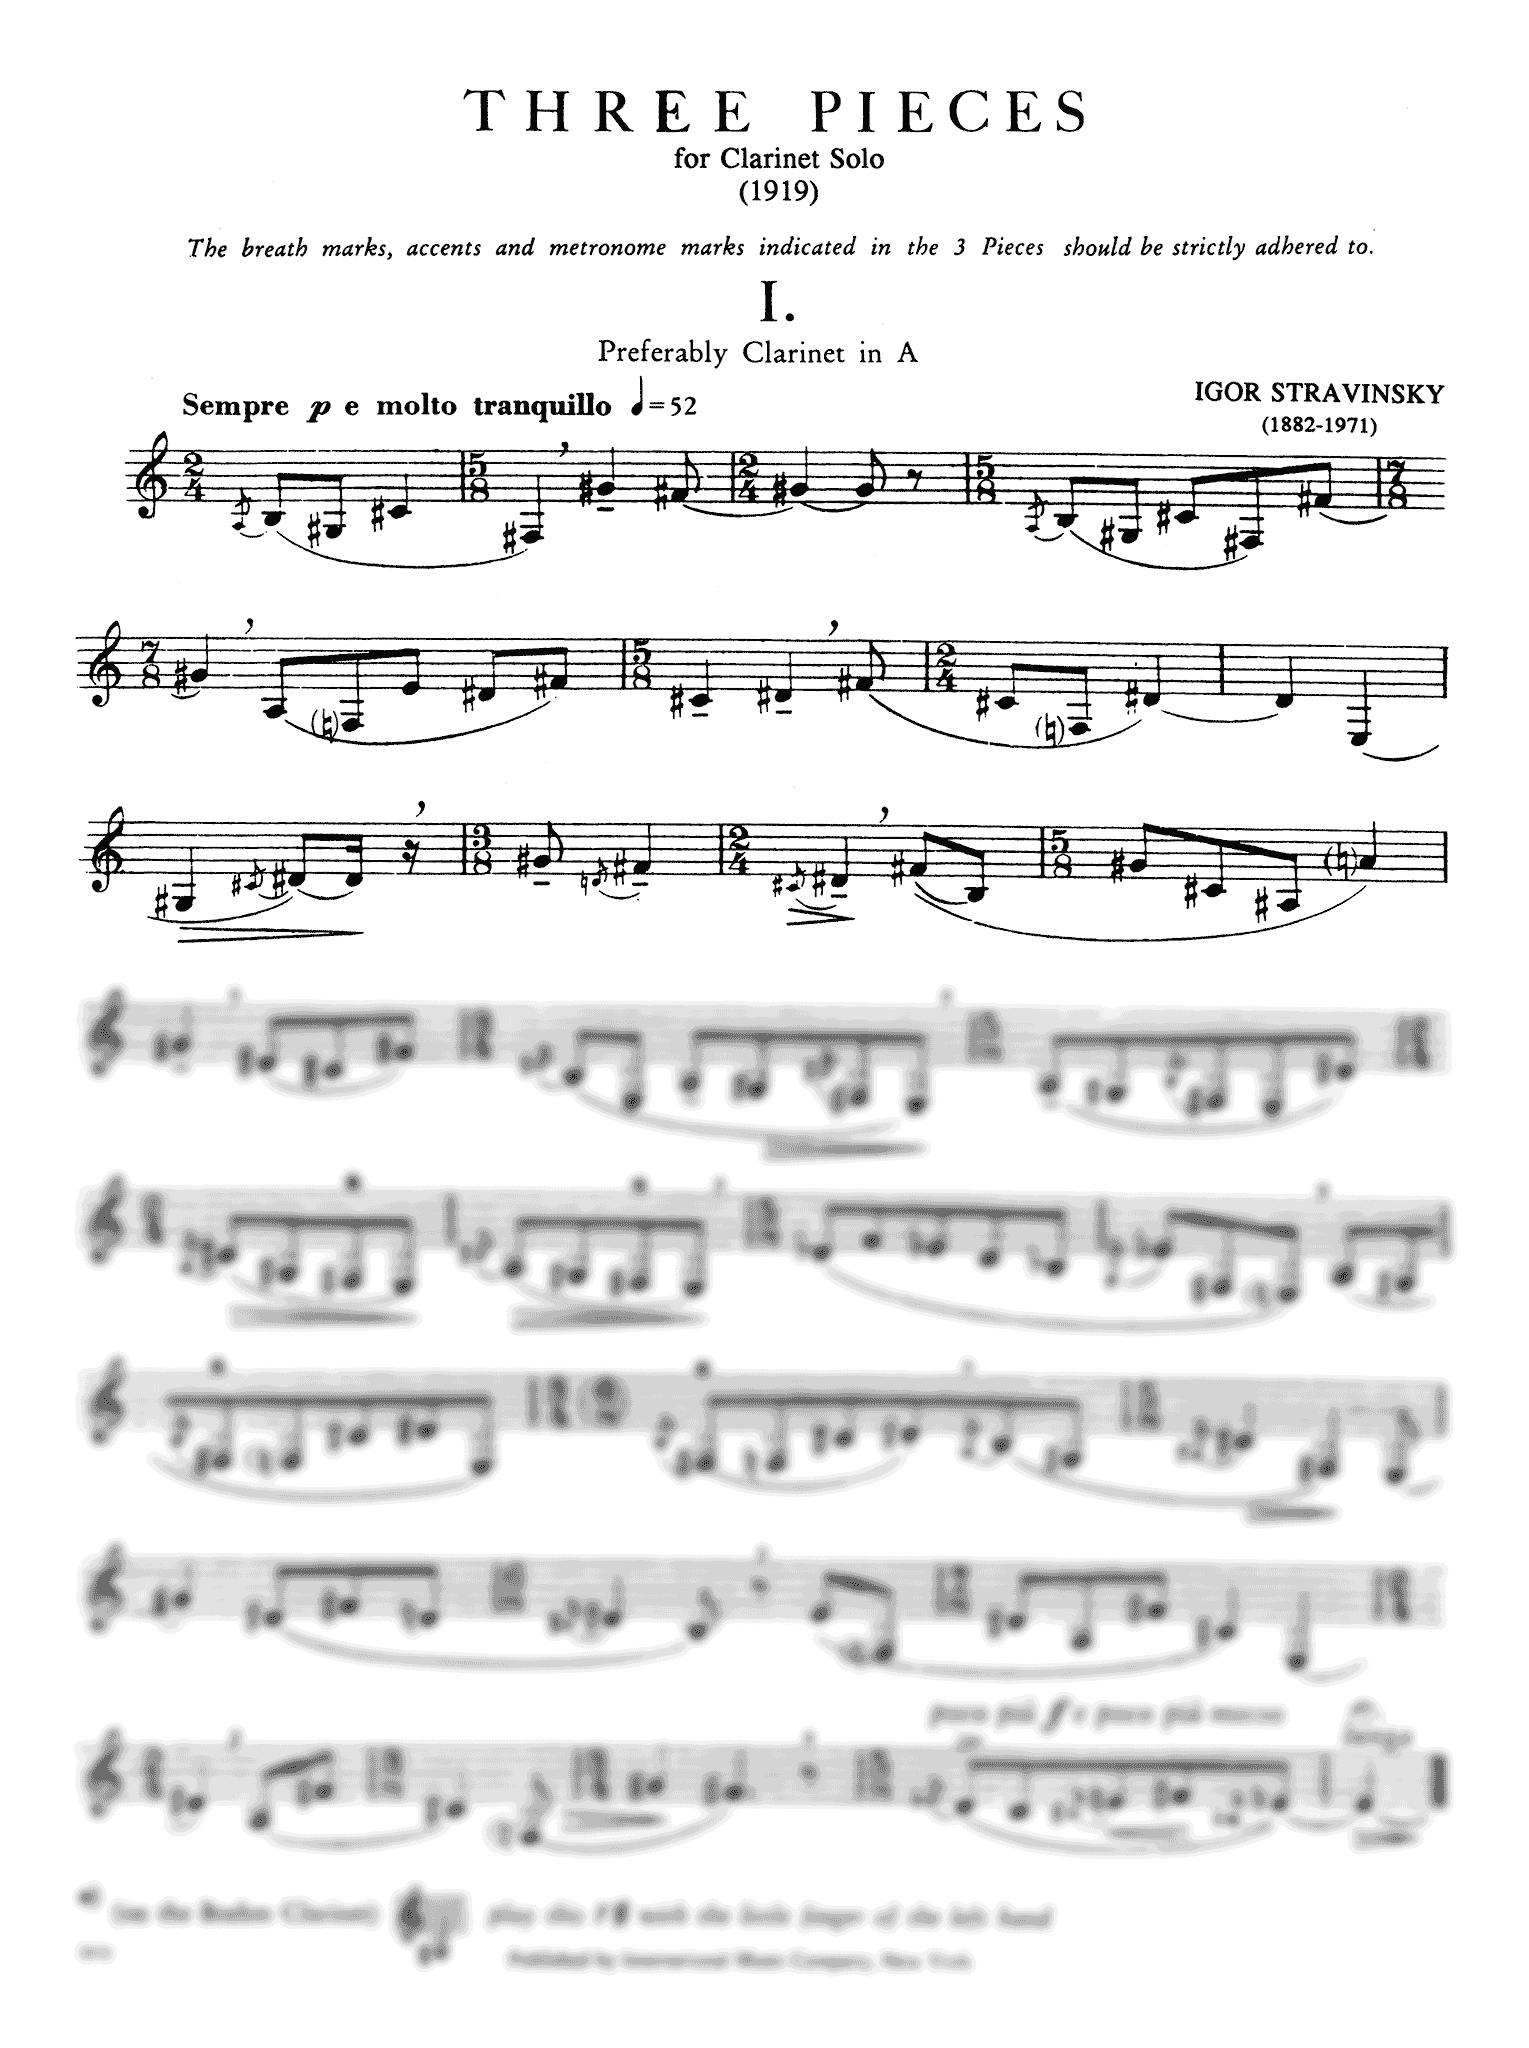 Three Pieces for Clarinet Solo - Movement 1